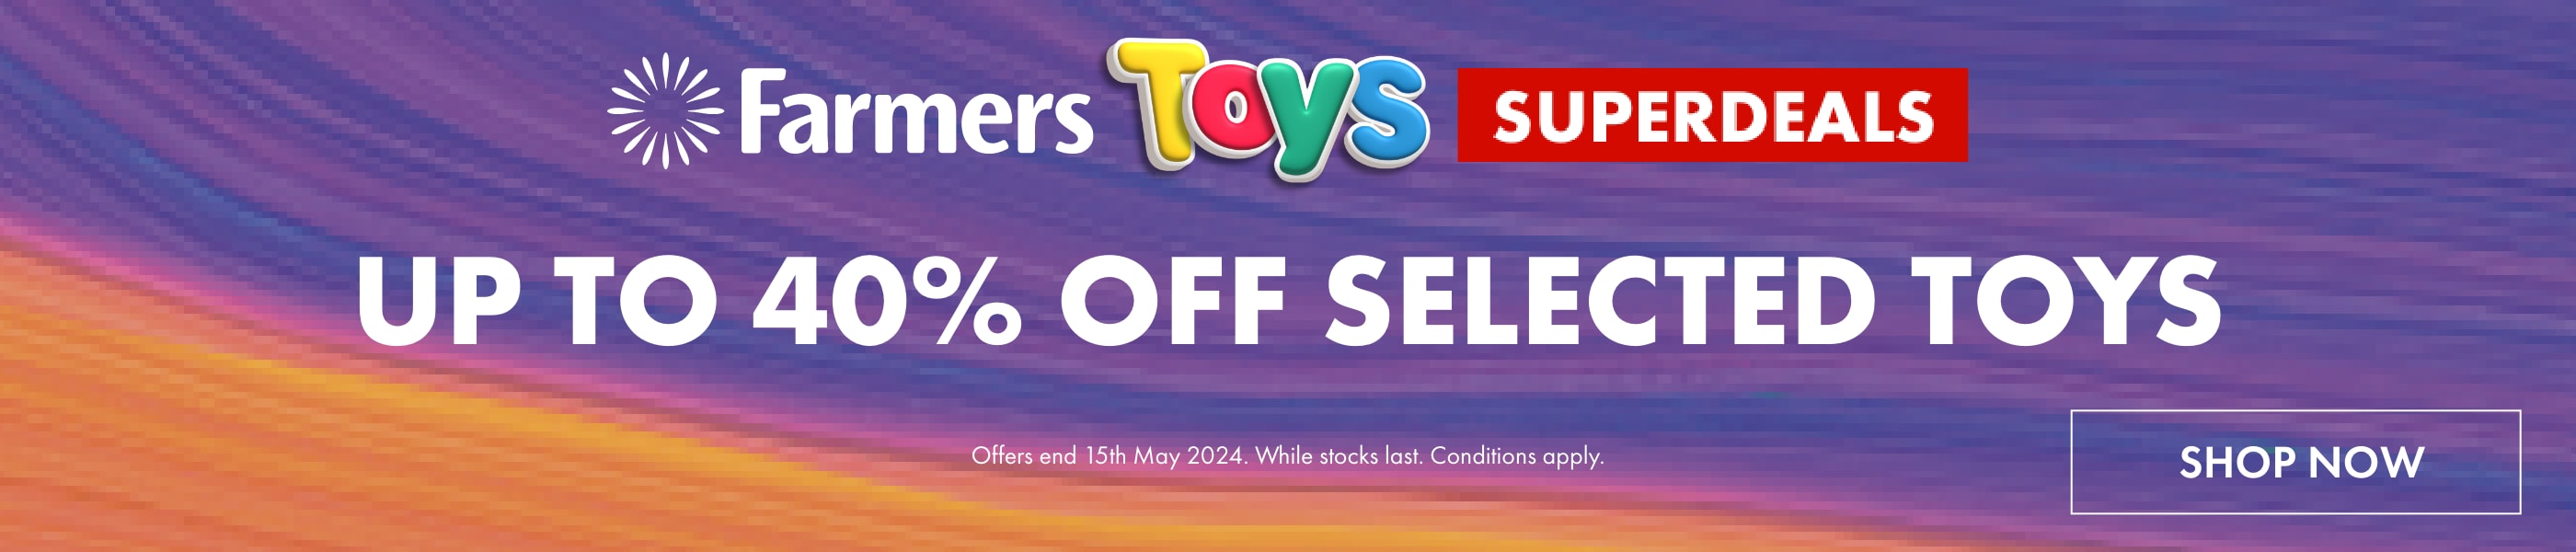 TOYS SUPERDEALS | UP TO 40% OFF THESES SELECTED TOYS 